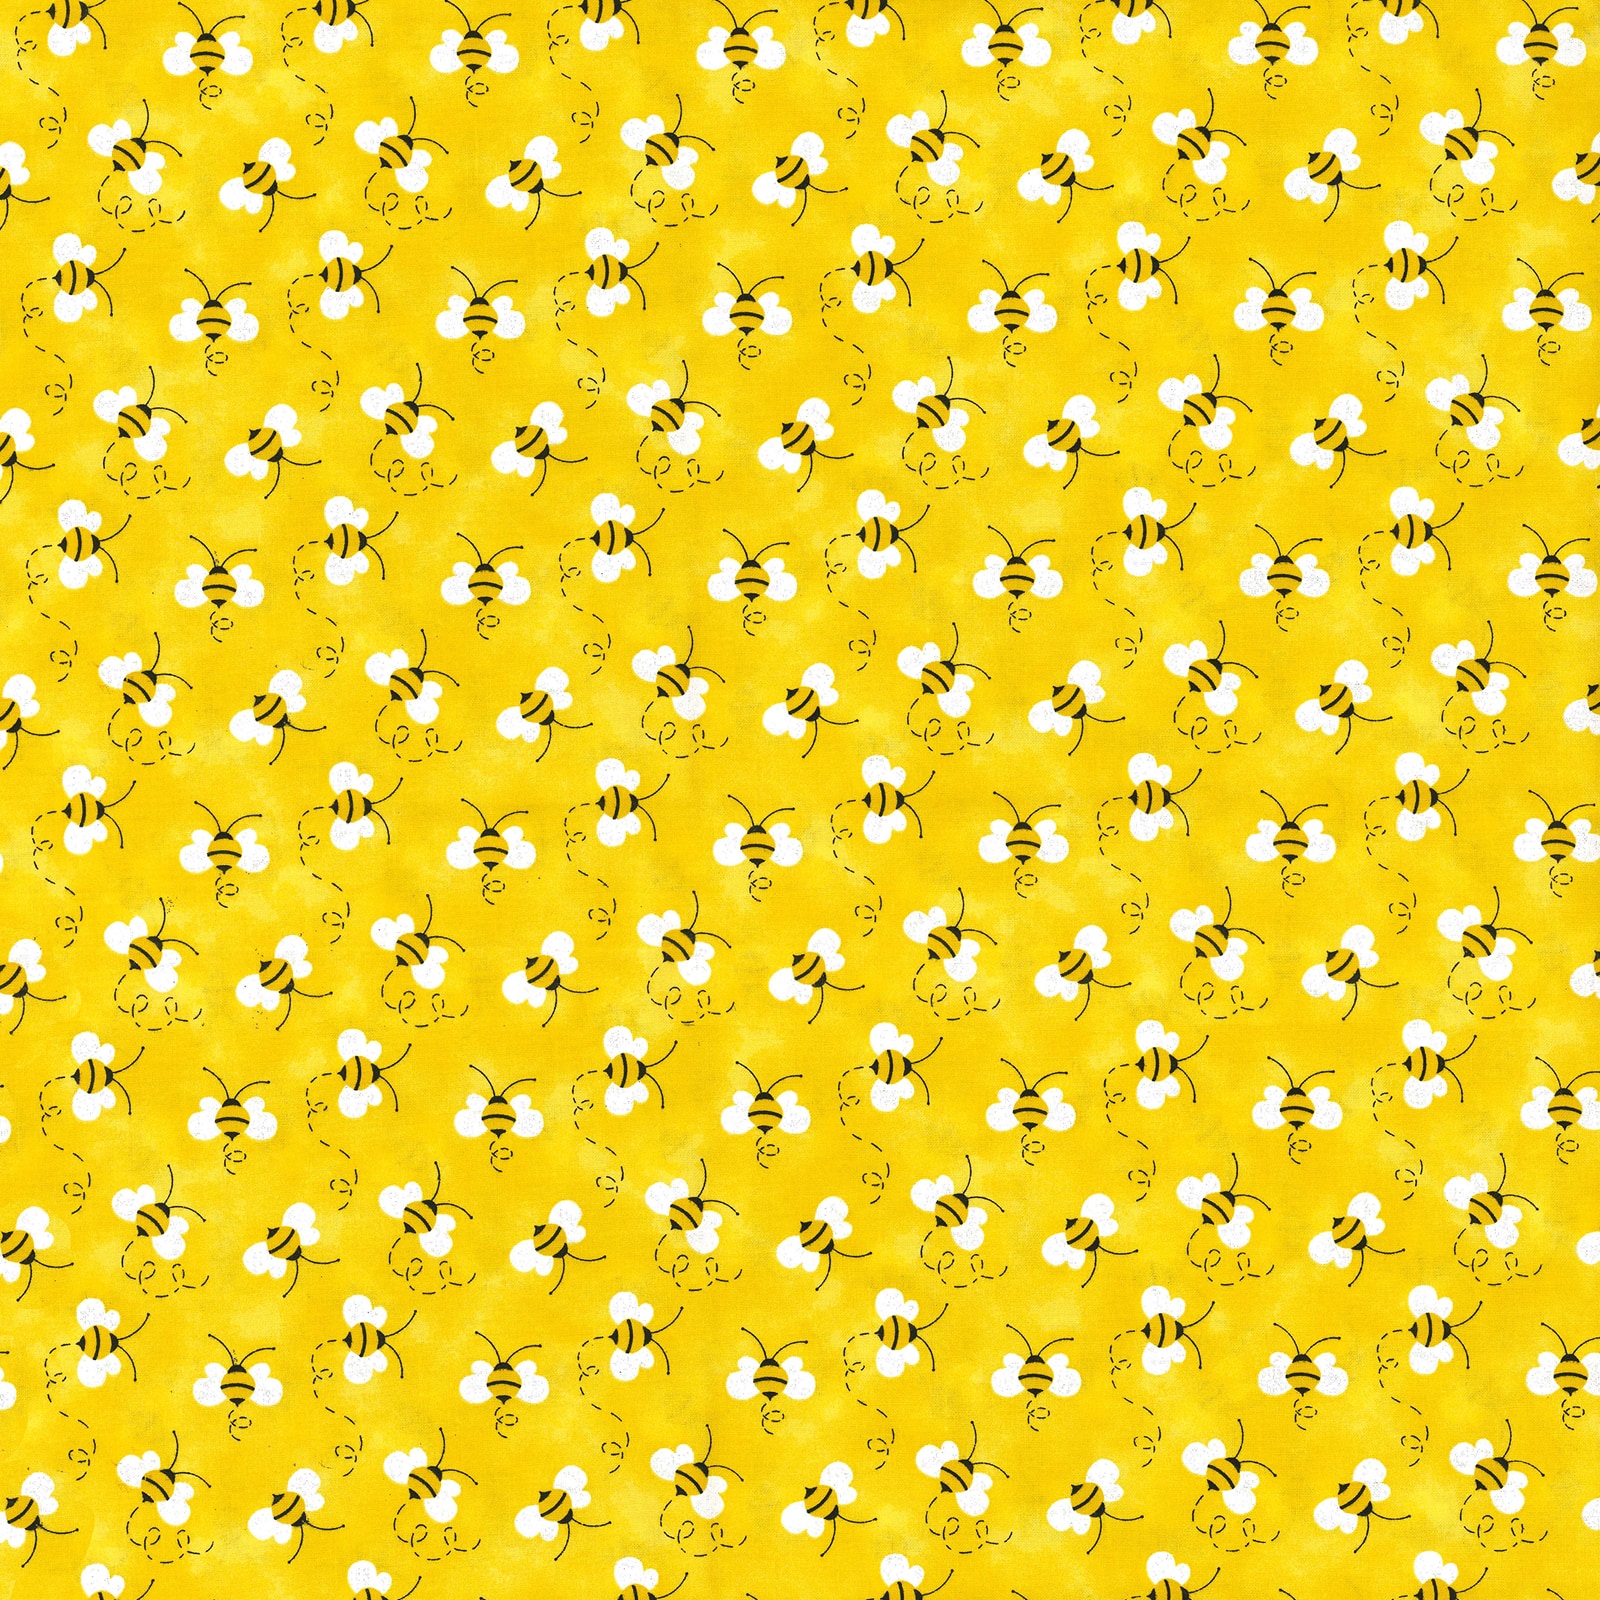 Fabric Traditions Yellow Bumblebee Novelty Cotton Fabric